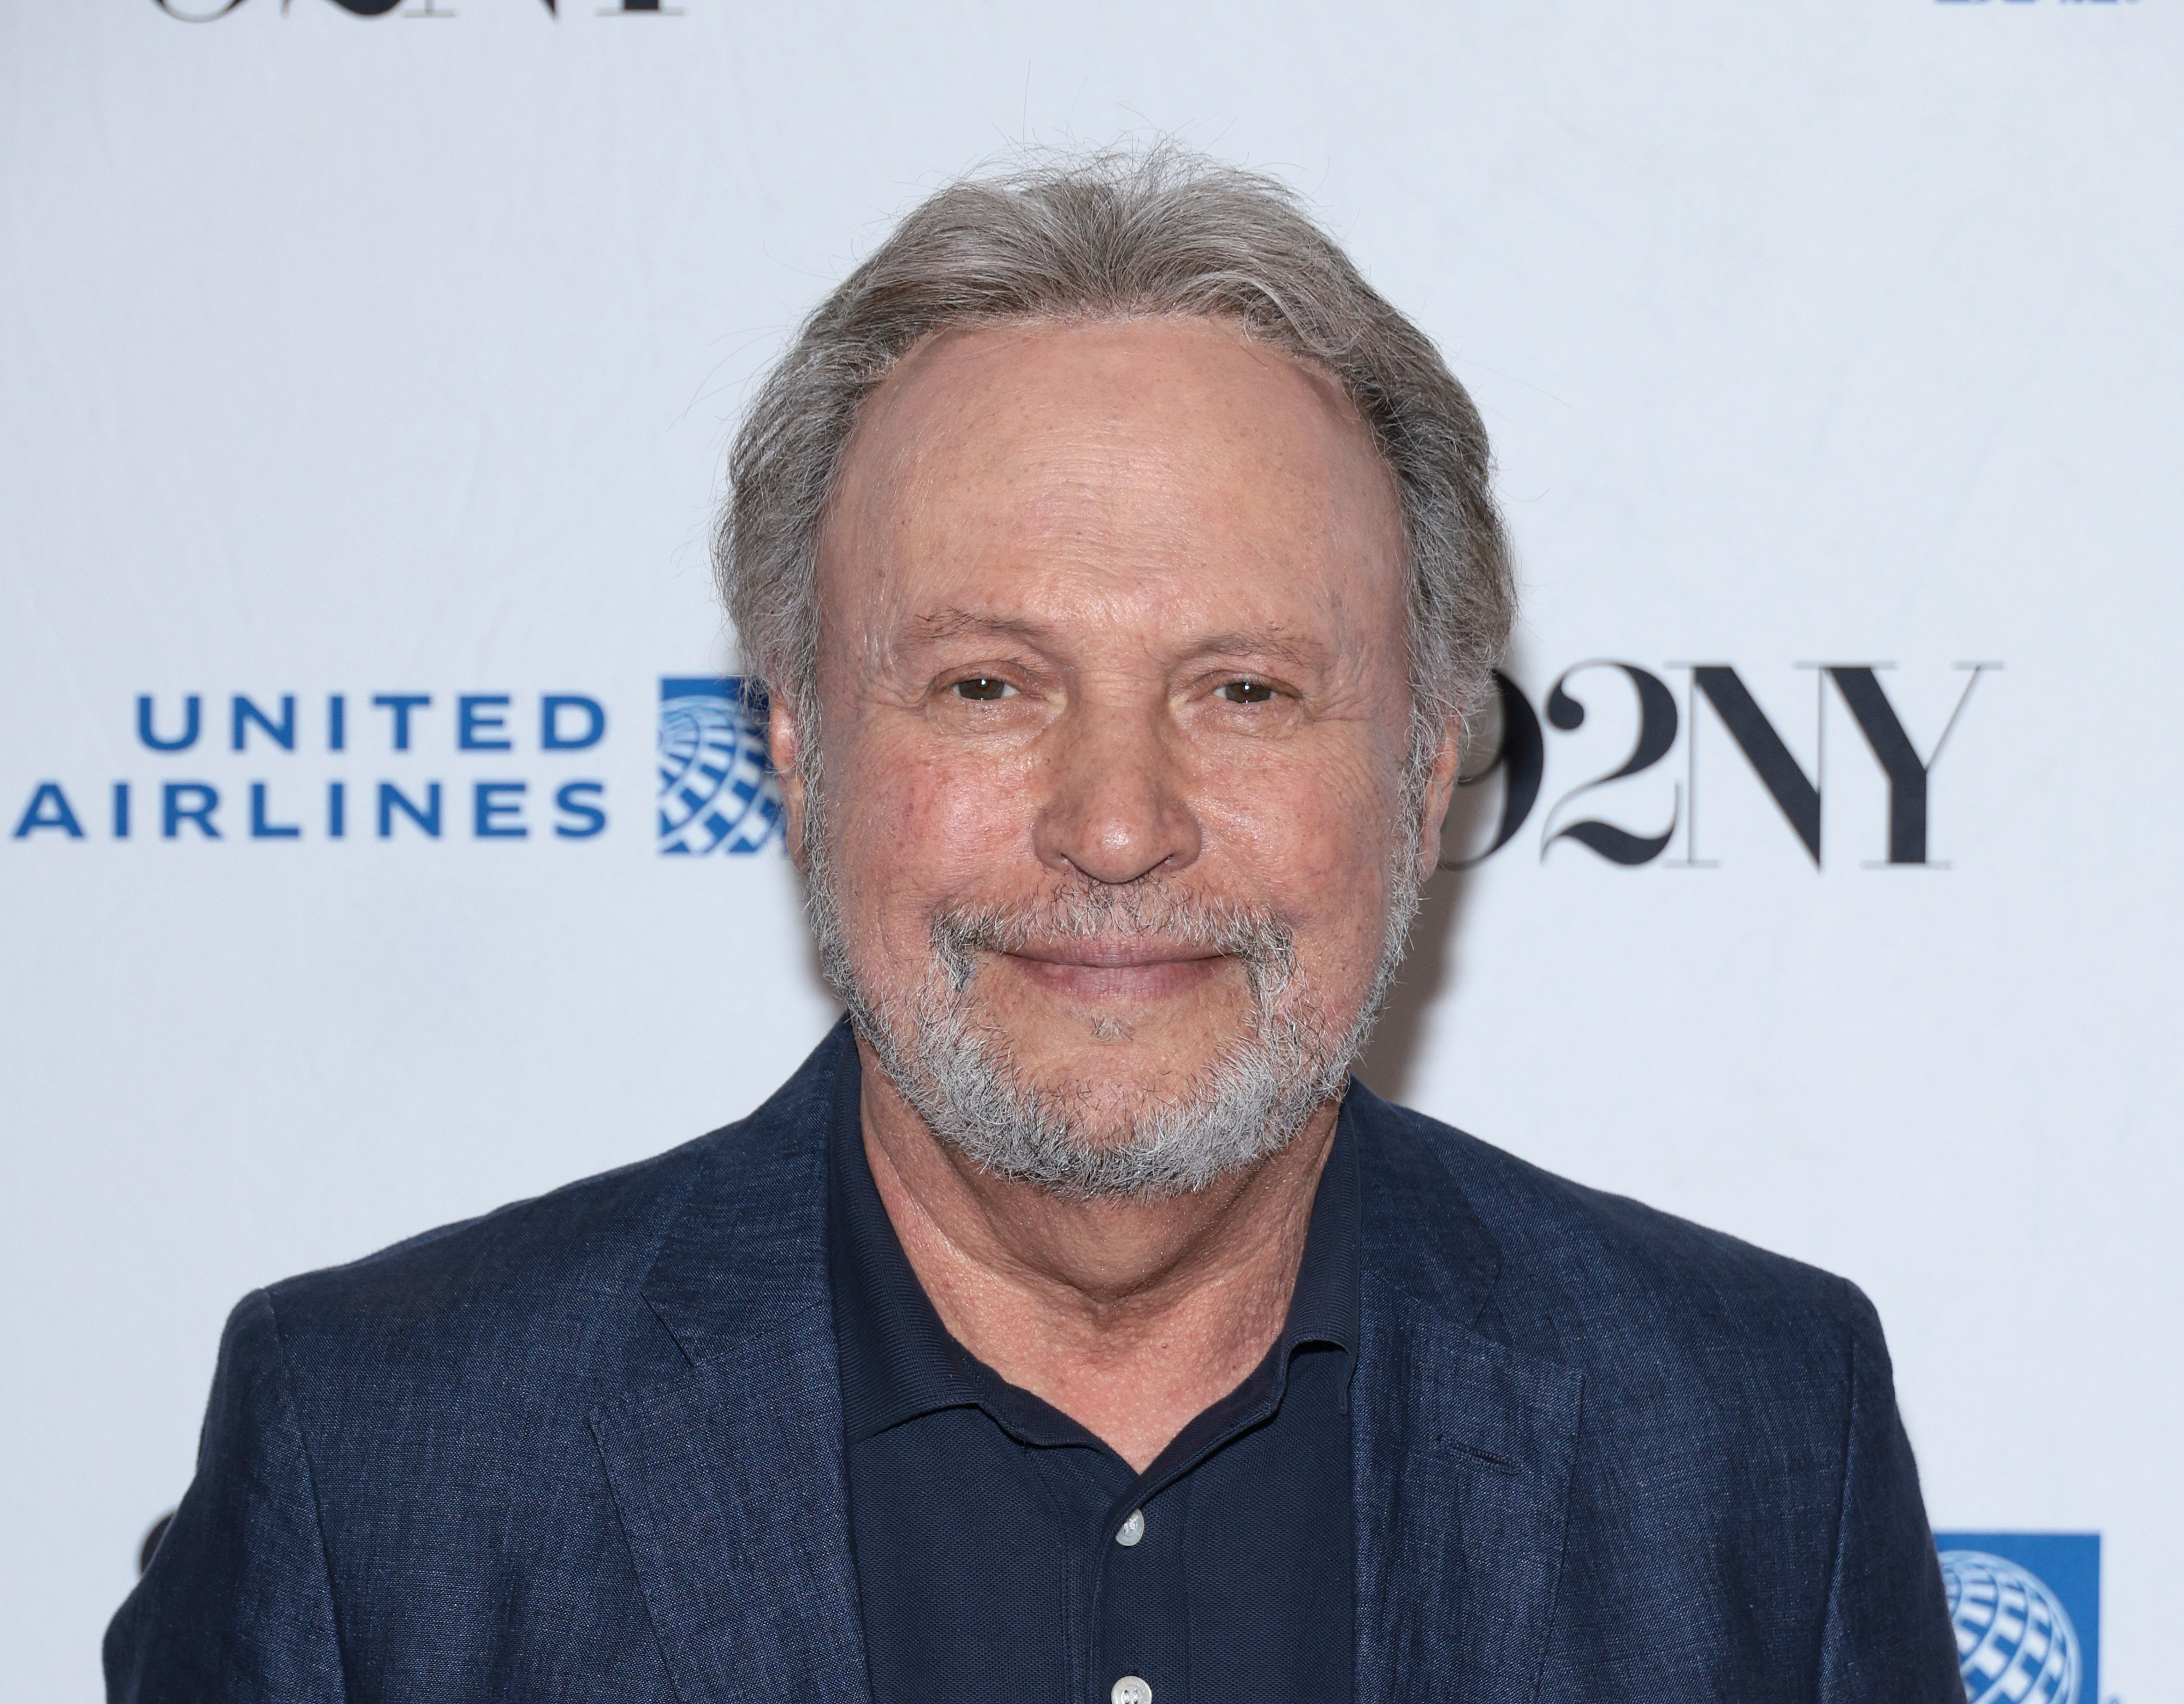 Billy Crystal attends a conversation at The 92nd Street Y, New York in New York City